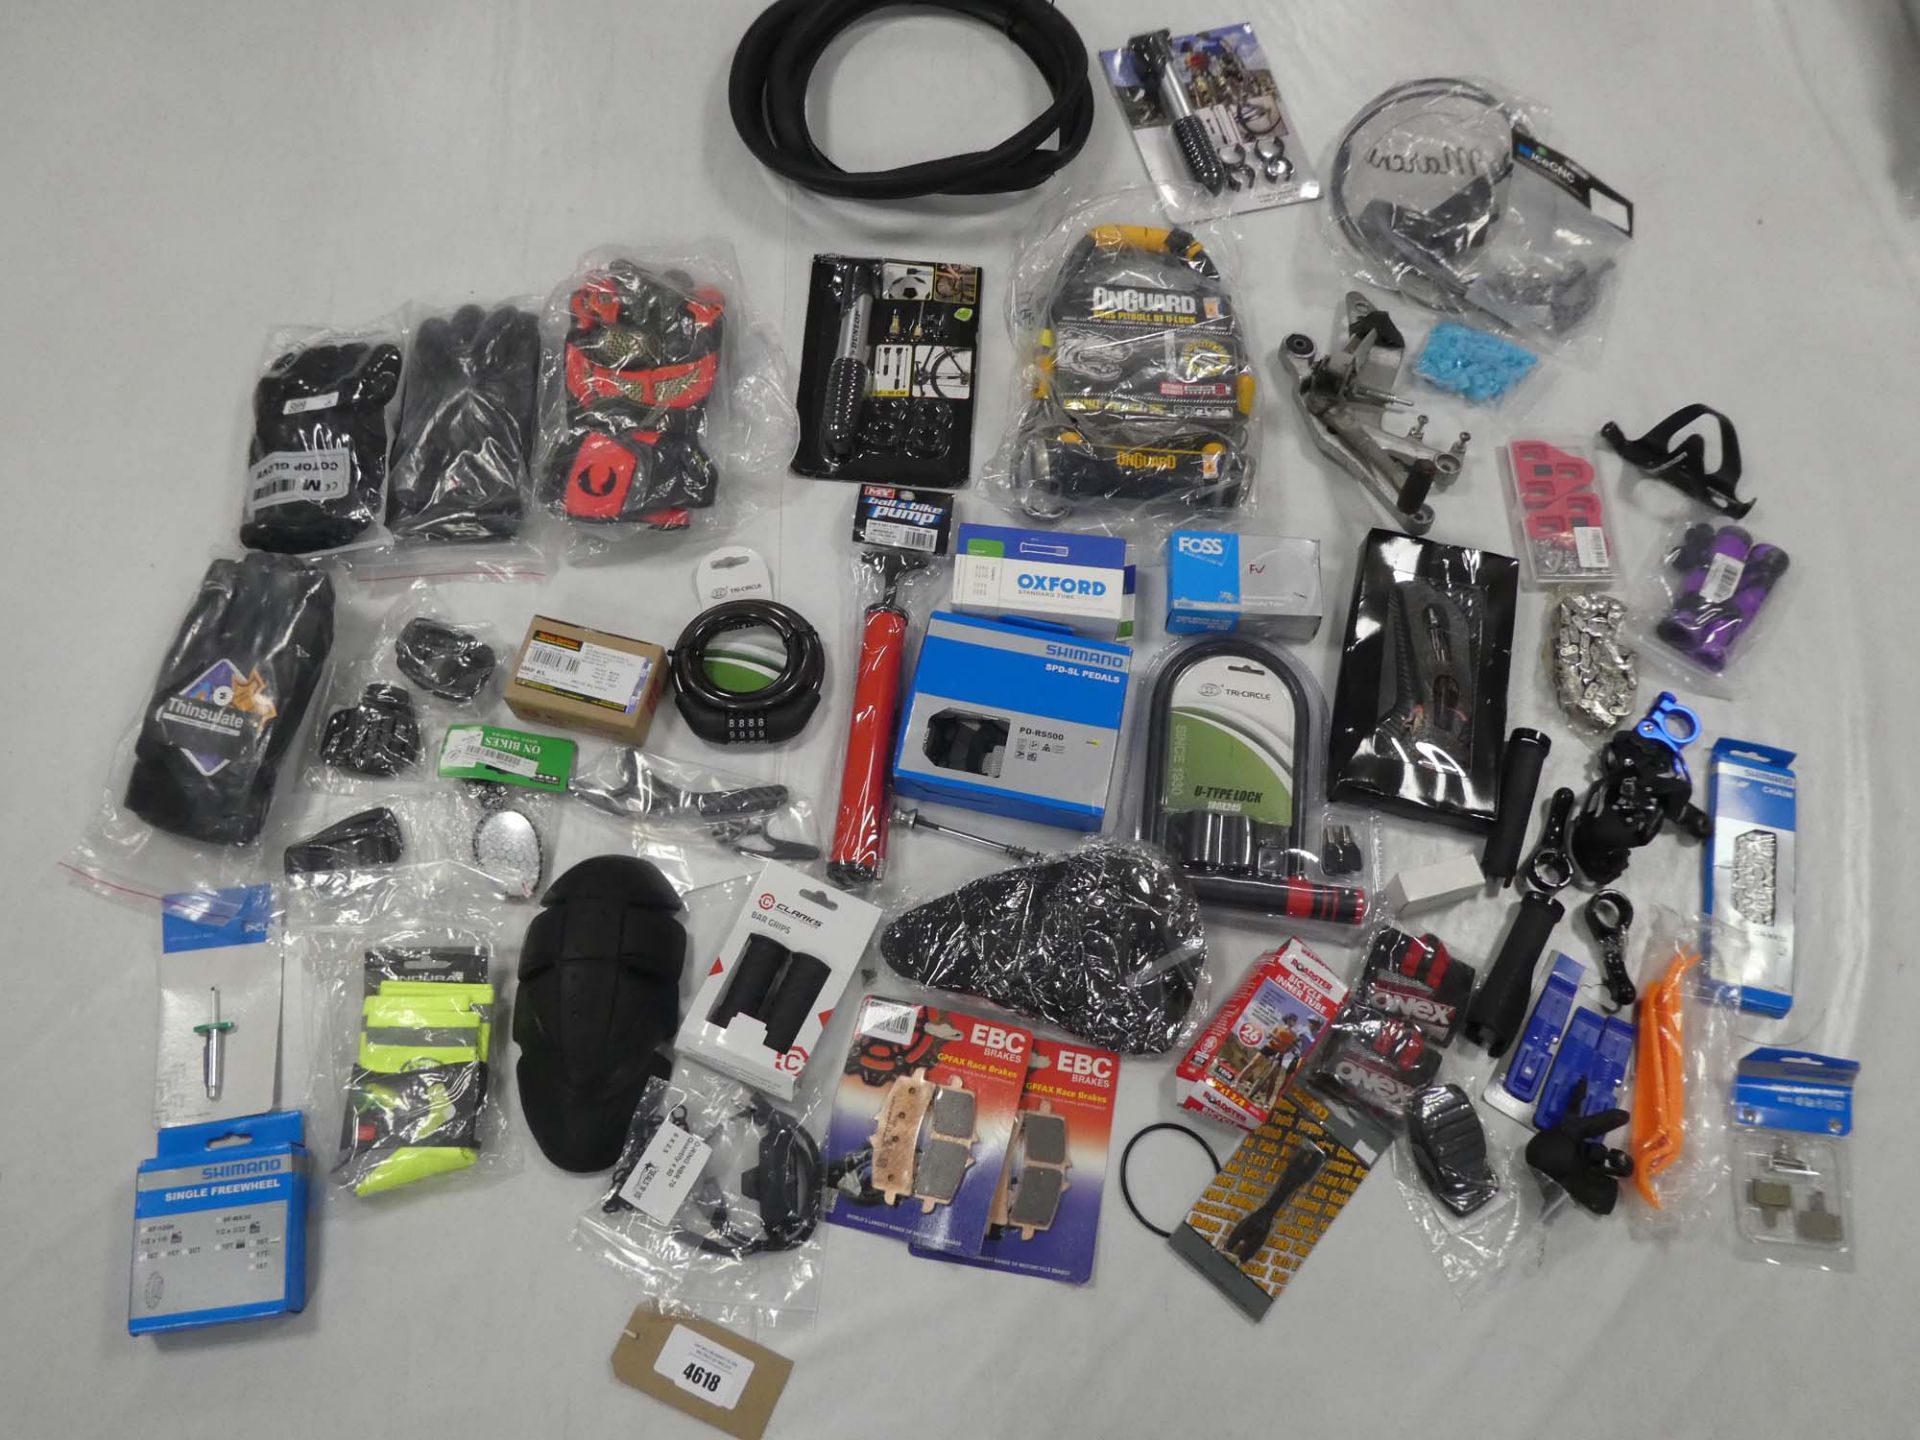 Selection of biking equipment, including chains, pedals, puncture repair items, gloves etc